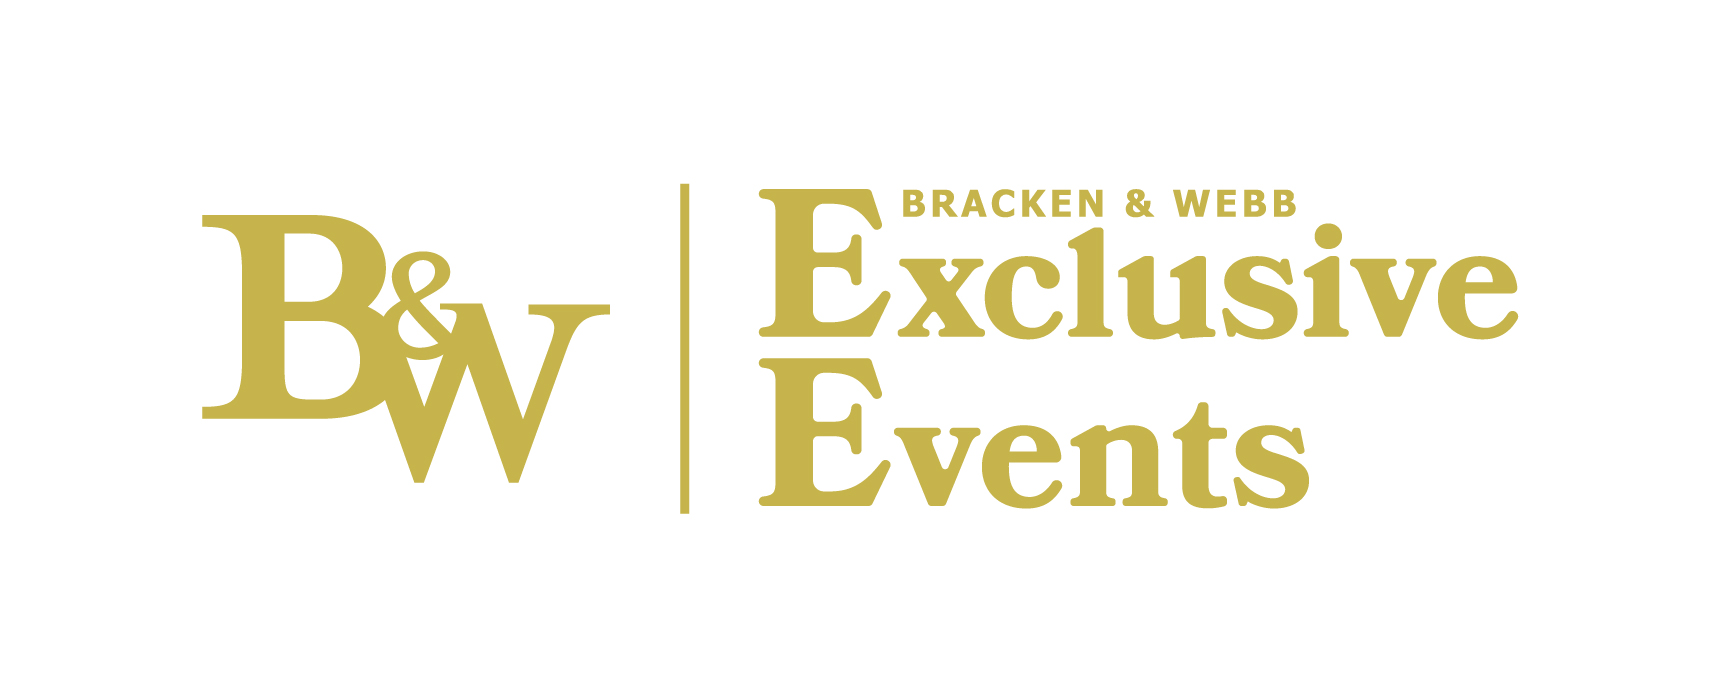 B&W Exclusive Events